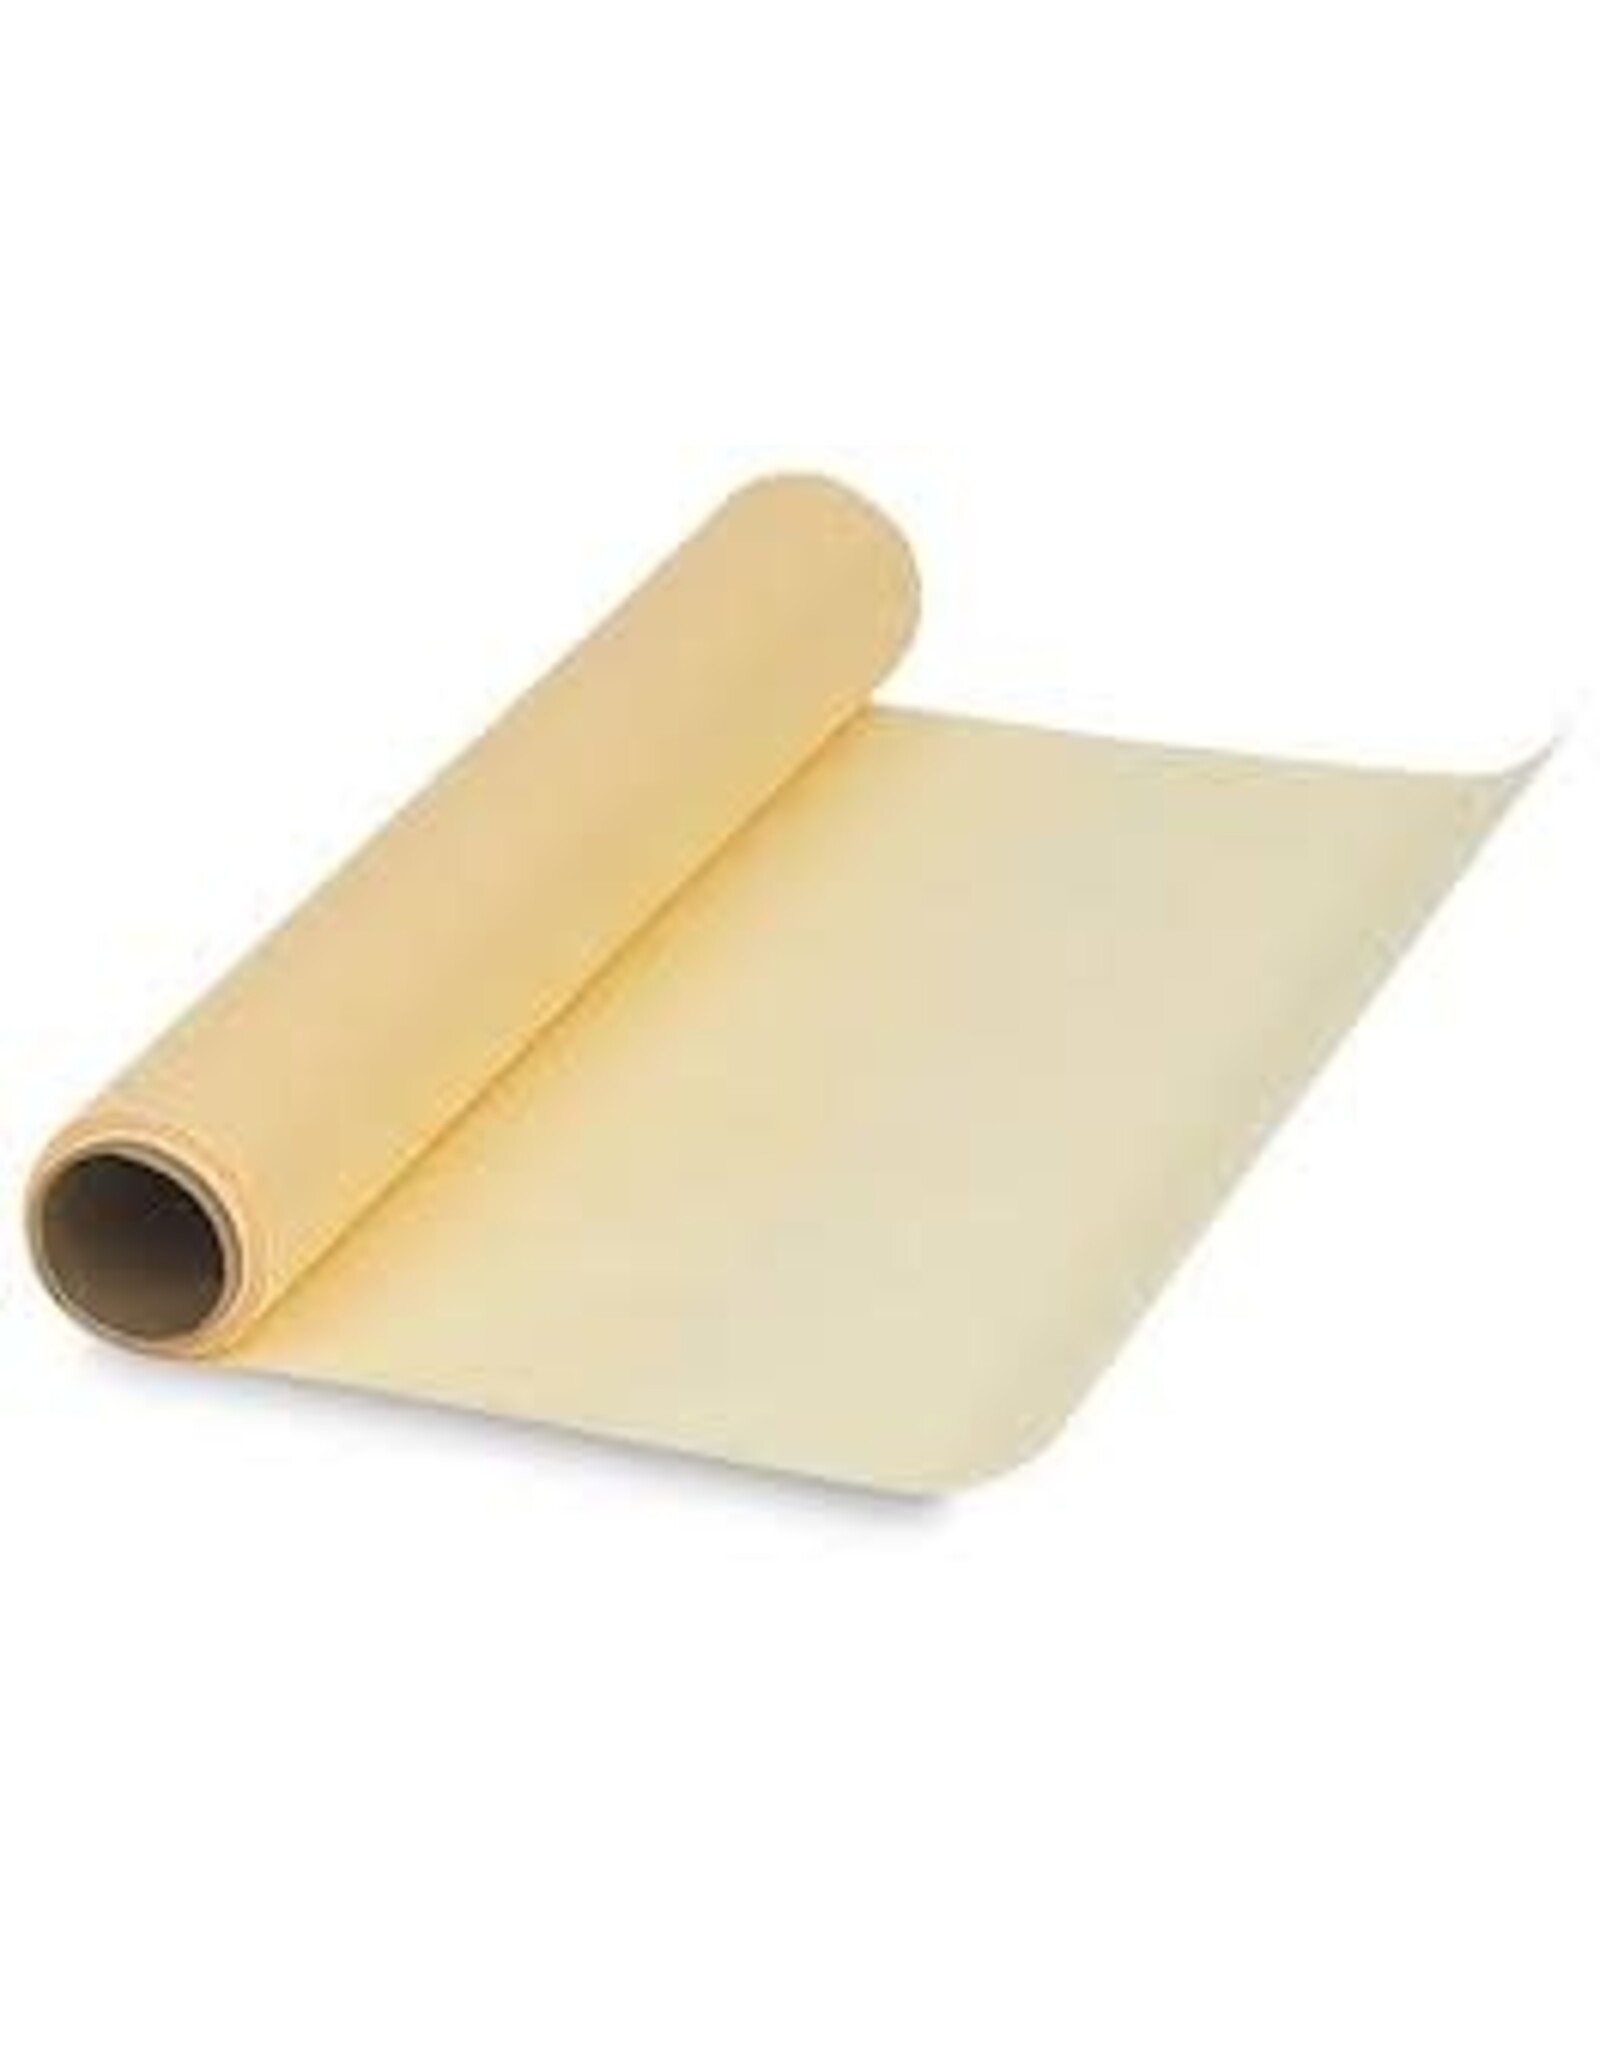 CLEARANCE Bienfang #107 Sketching & Tracing Paper Roll (7 lb / 28 GSM)